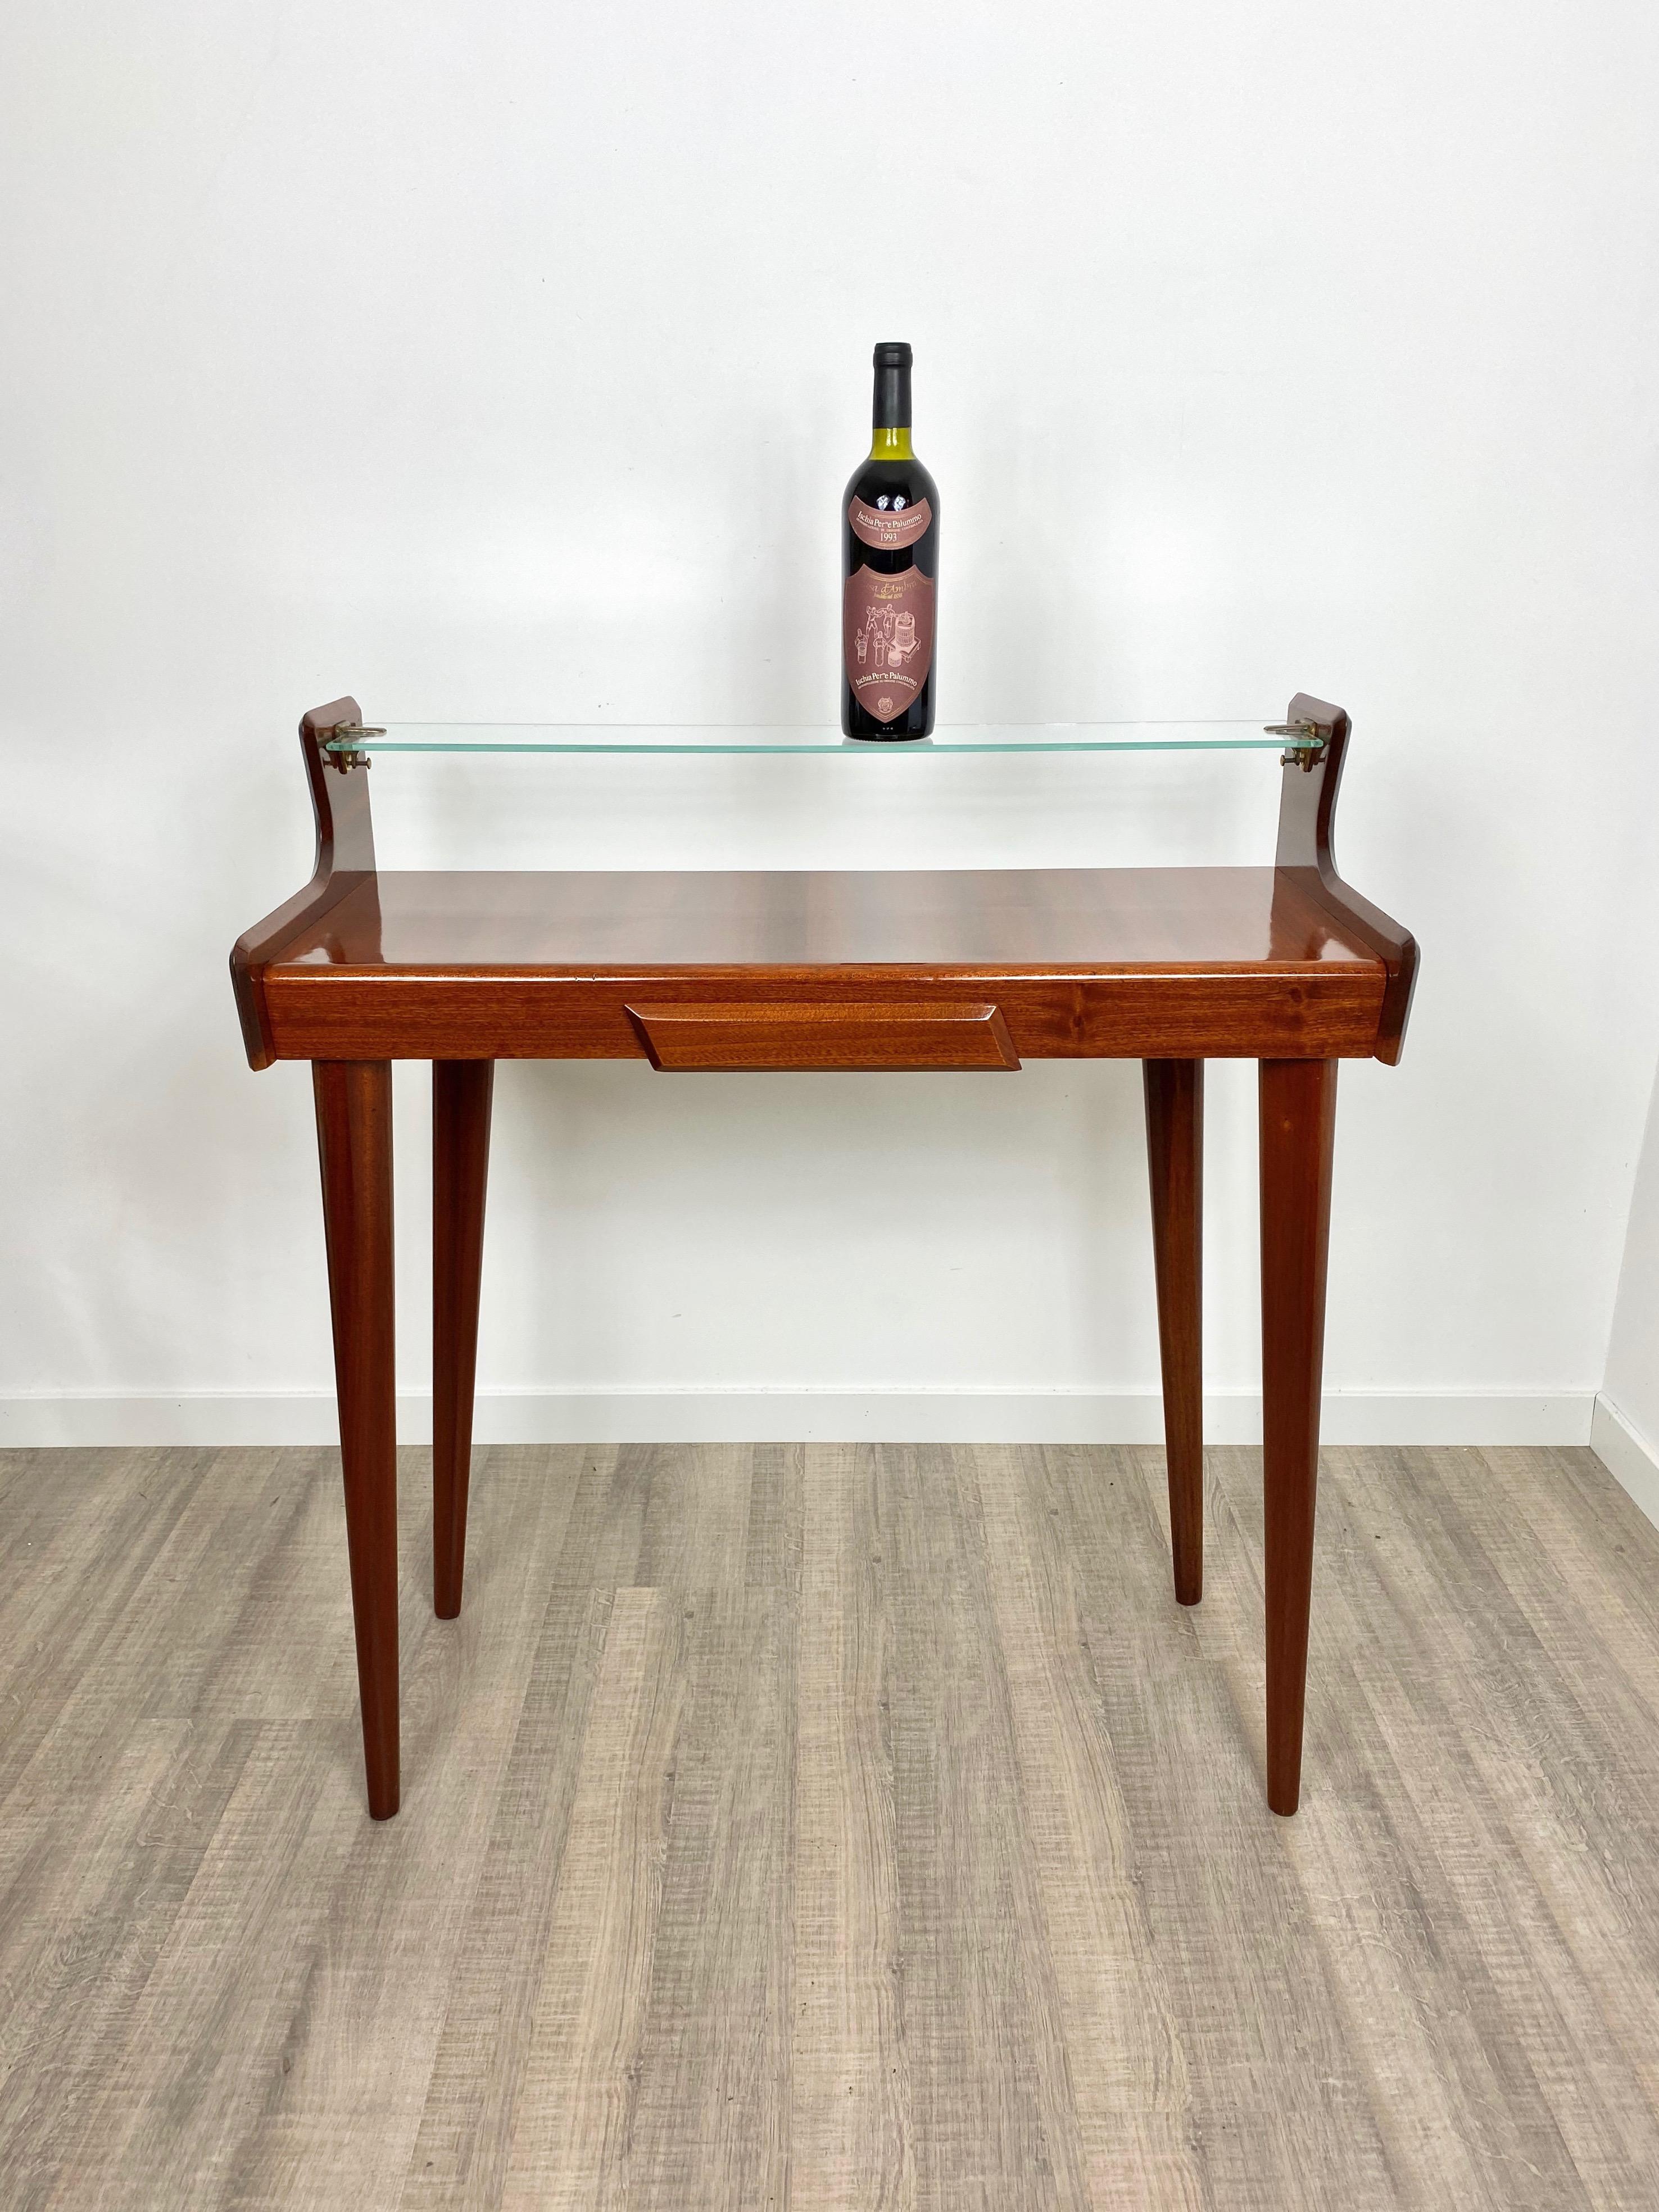 Italian Midcentury Mahogany Wood and Glass Console Table by Carlo de Carli 1950s For Sale 1